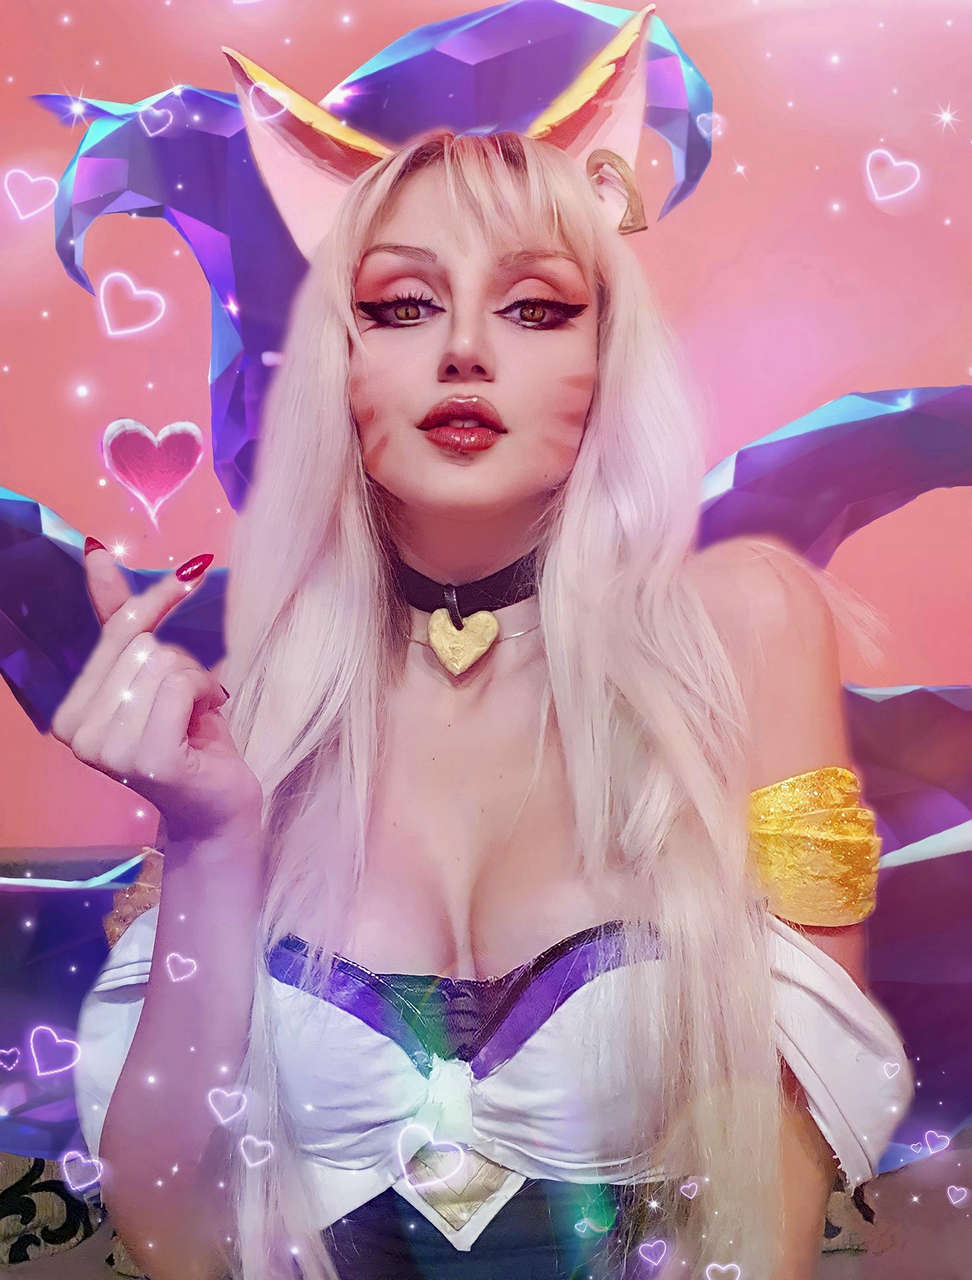 If You Like Cosplay And Hentai Come Join Me On My Of Link In The Comment